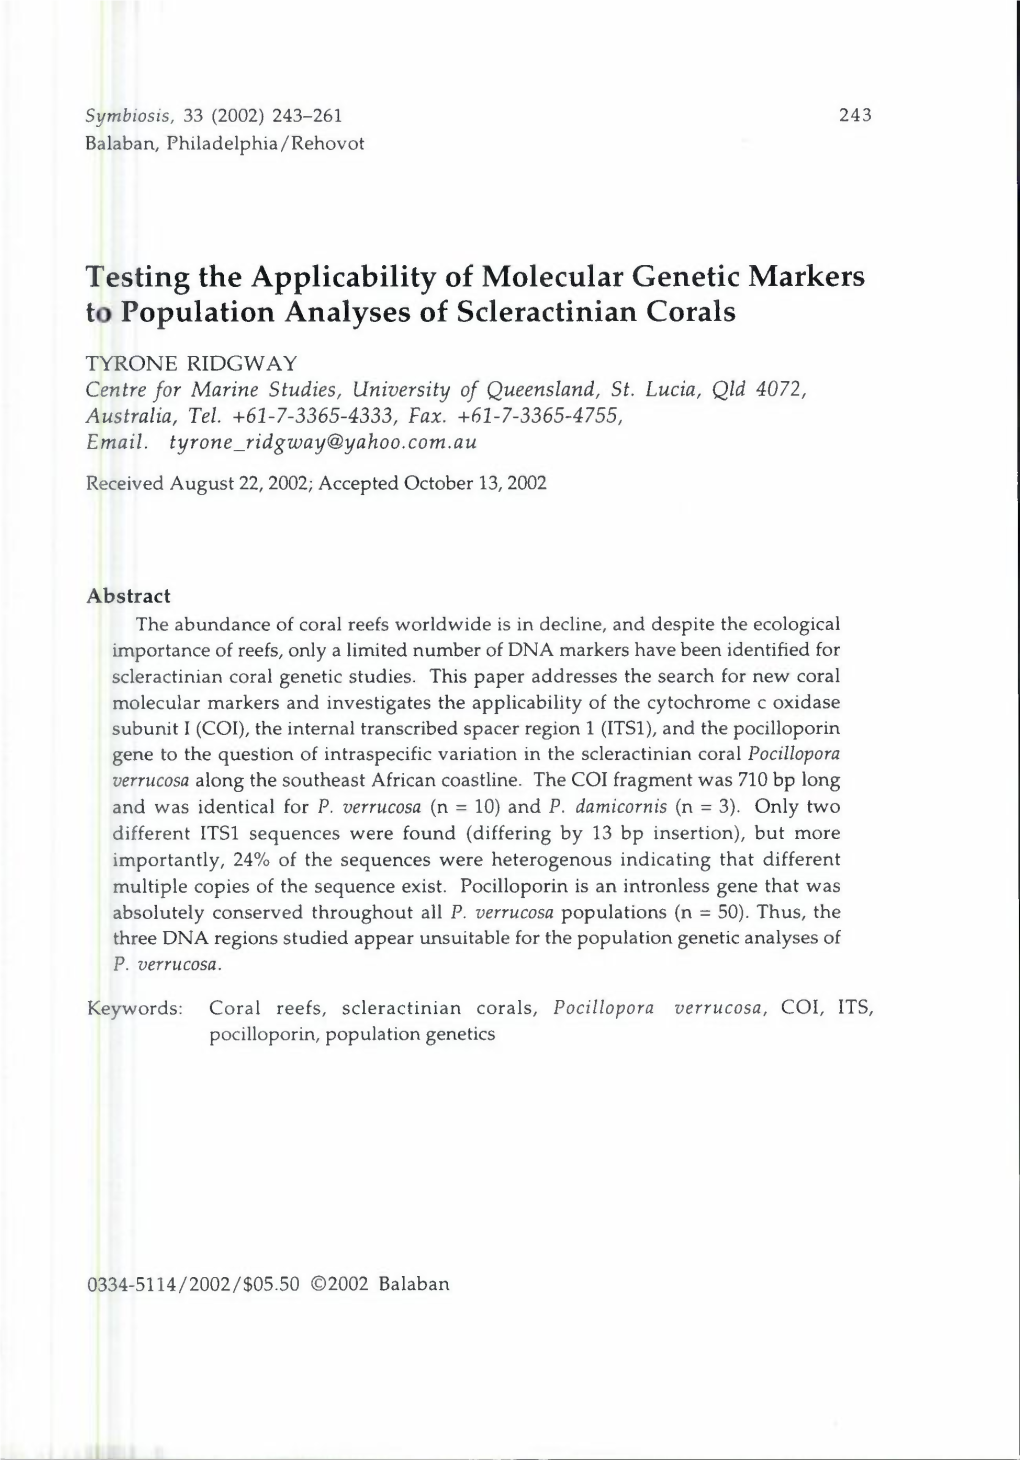 Testing the Applicability of Molecular Genetic Markers to Population Analyses of Scleractinian Corals